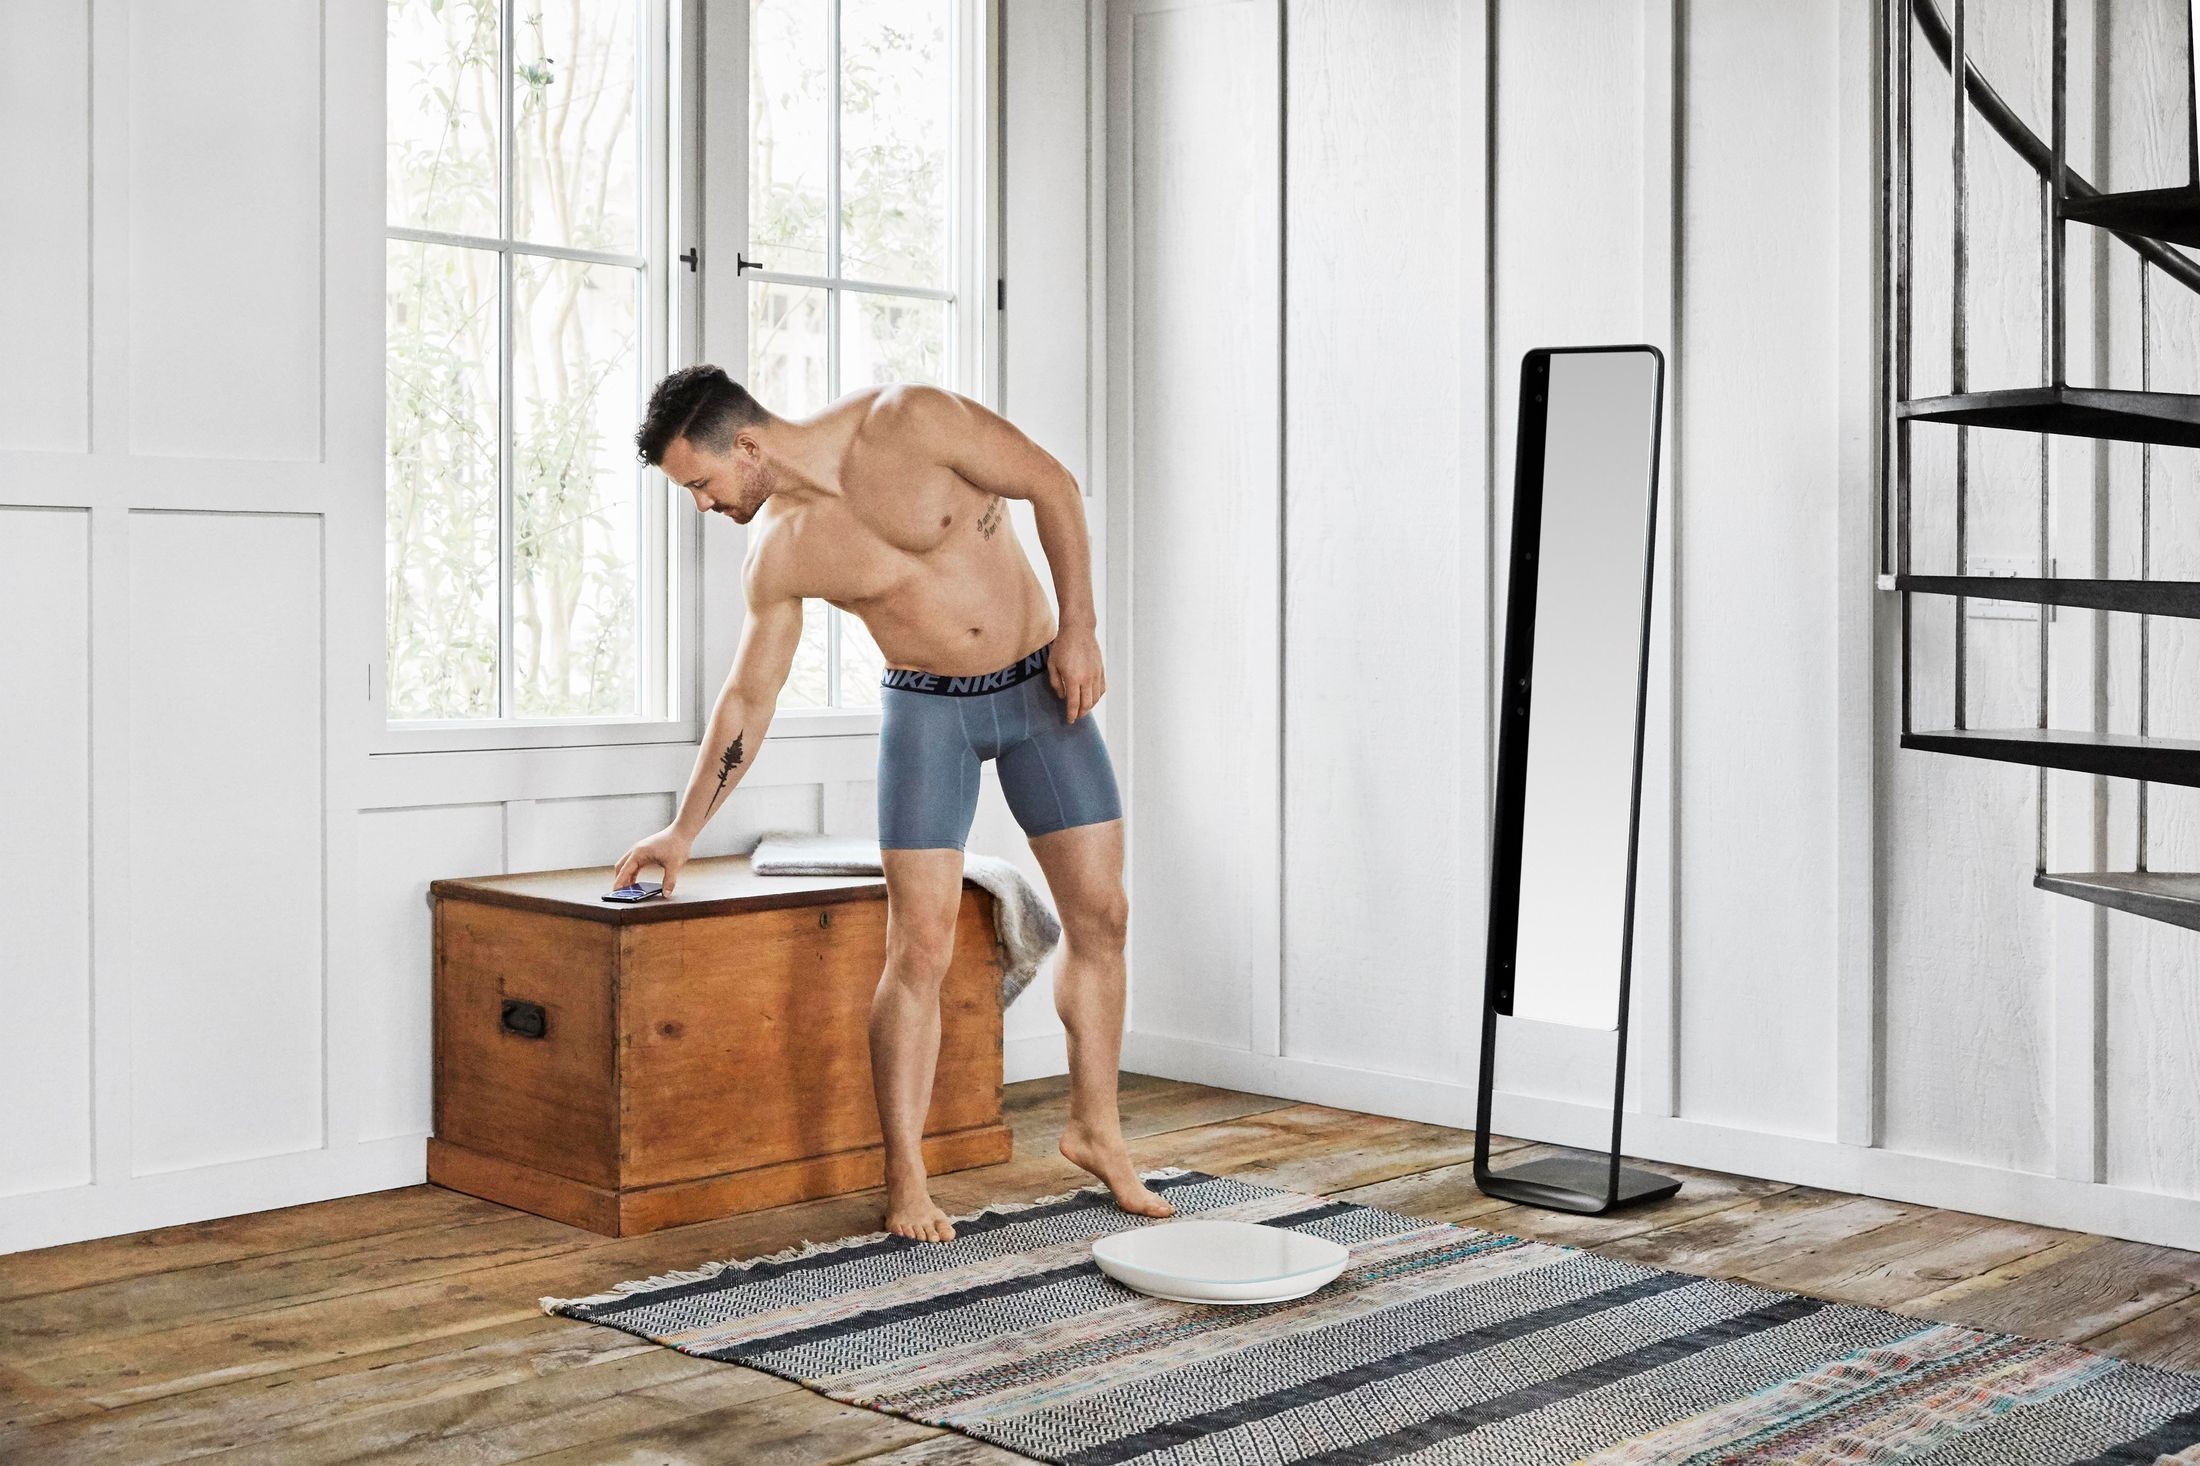 naked-labs-naked-home-body-scanner-man-with-smartphone.jpeg